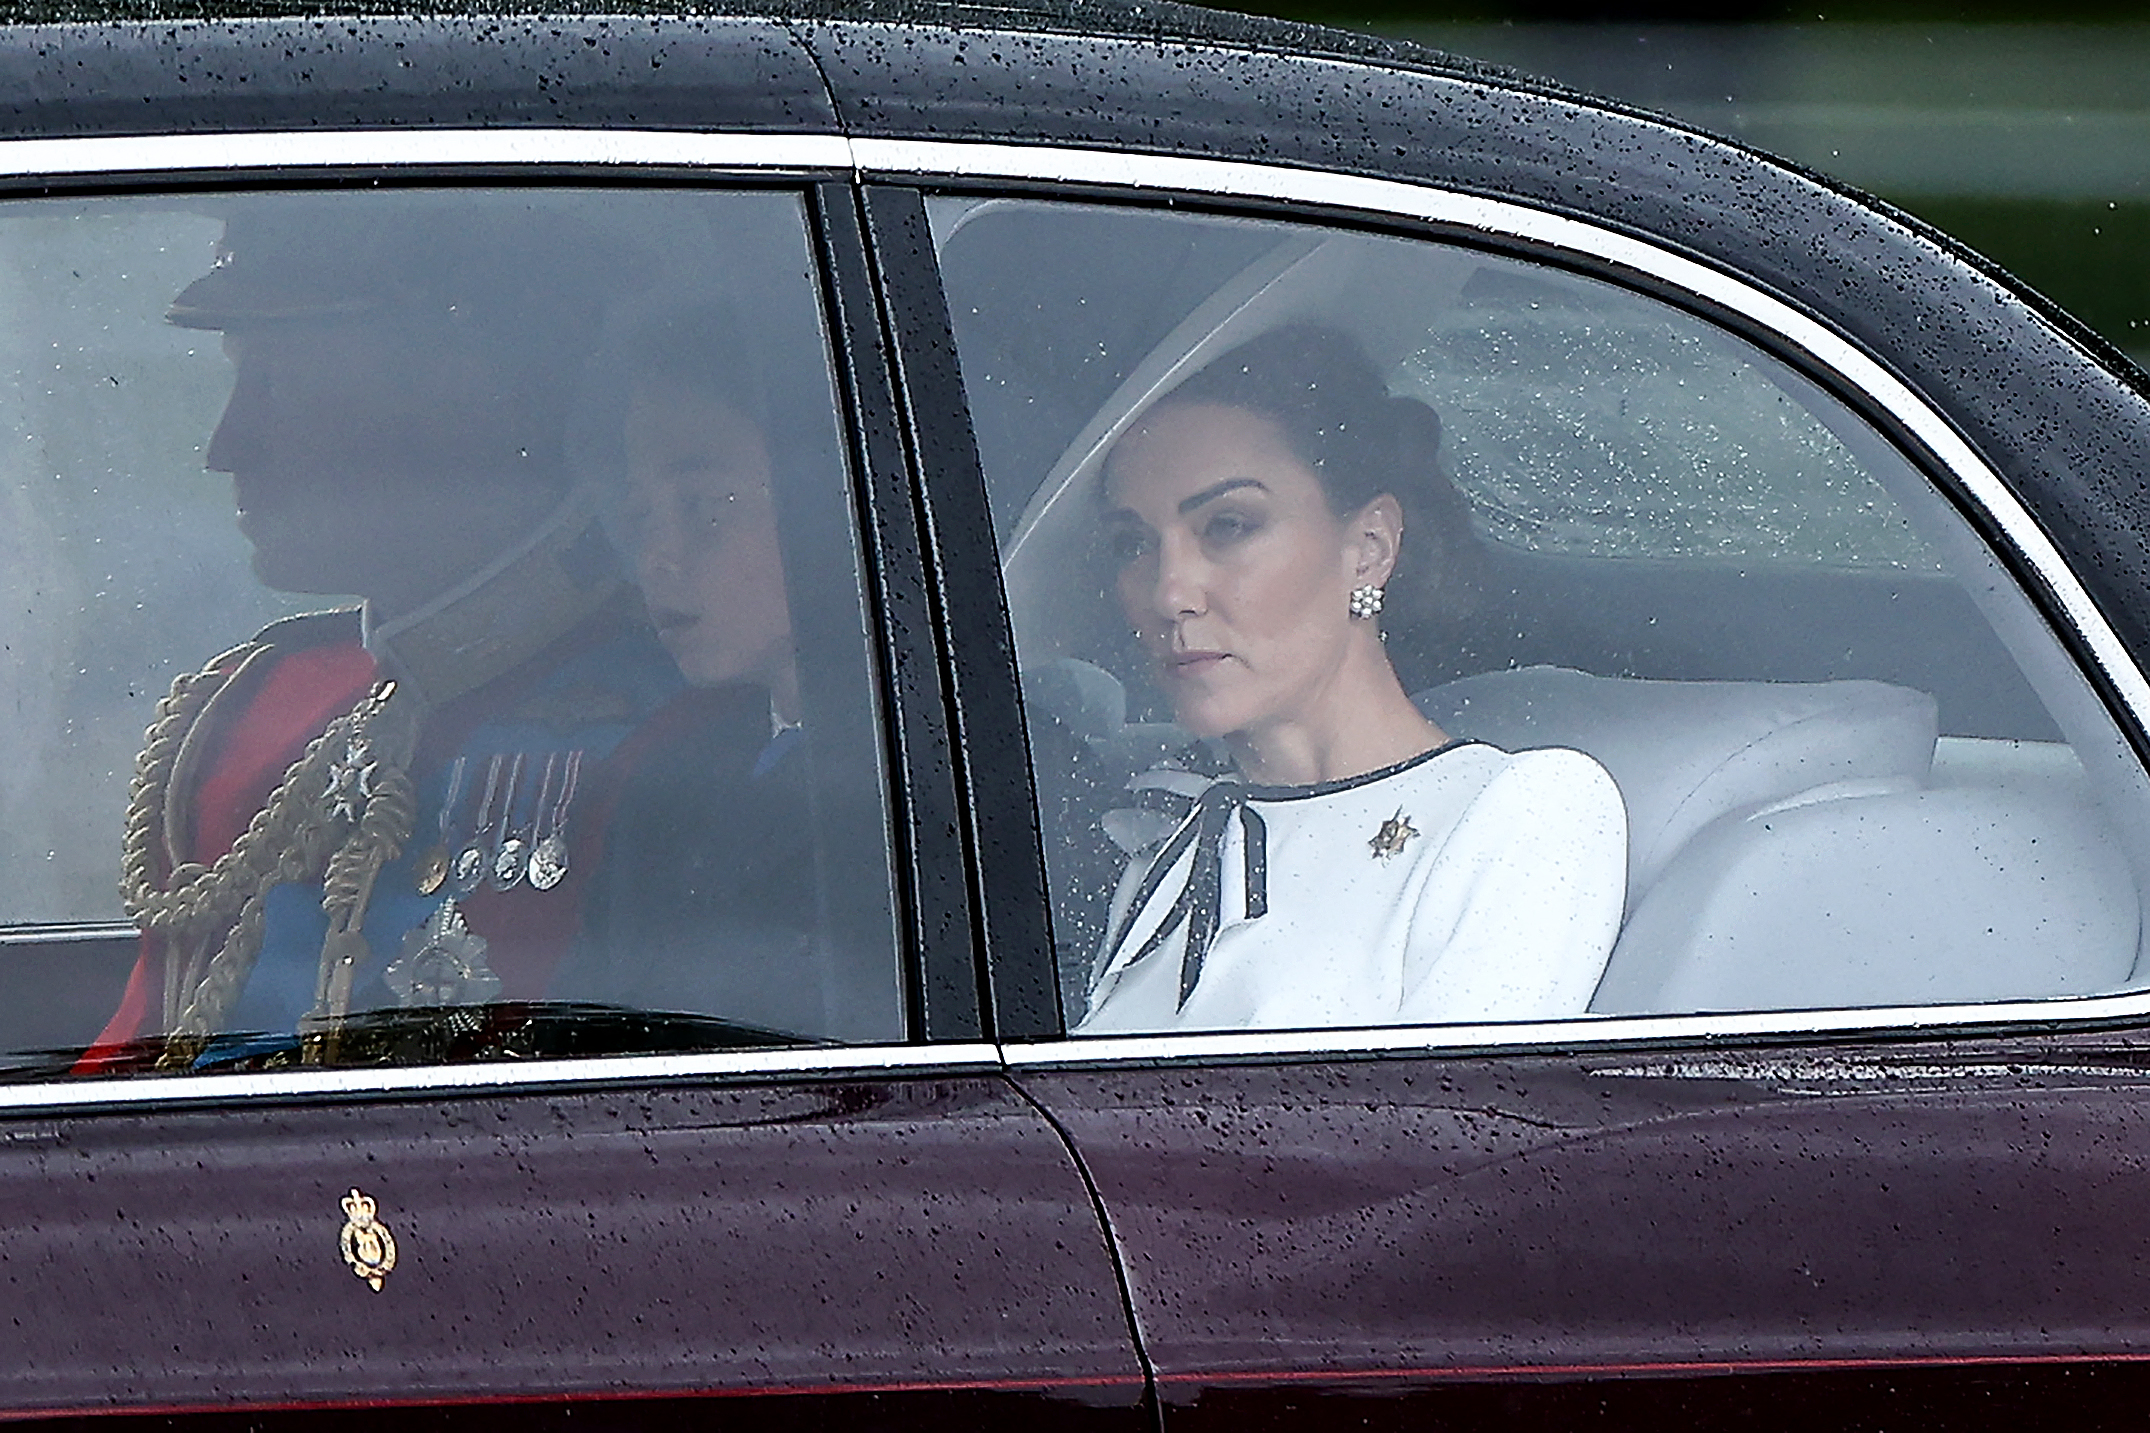 Prince William, Prince of Wales, Catherine, Princess of Wales, and Prince George of Wales on their way to Buckingham Palace before the King's Birthday Parade "Trooping the Colour" in London on June 15, 2024. | Source: Getty Images